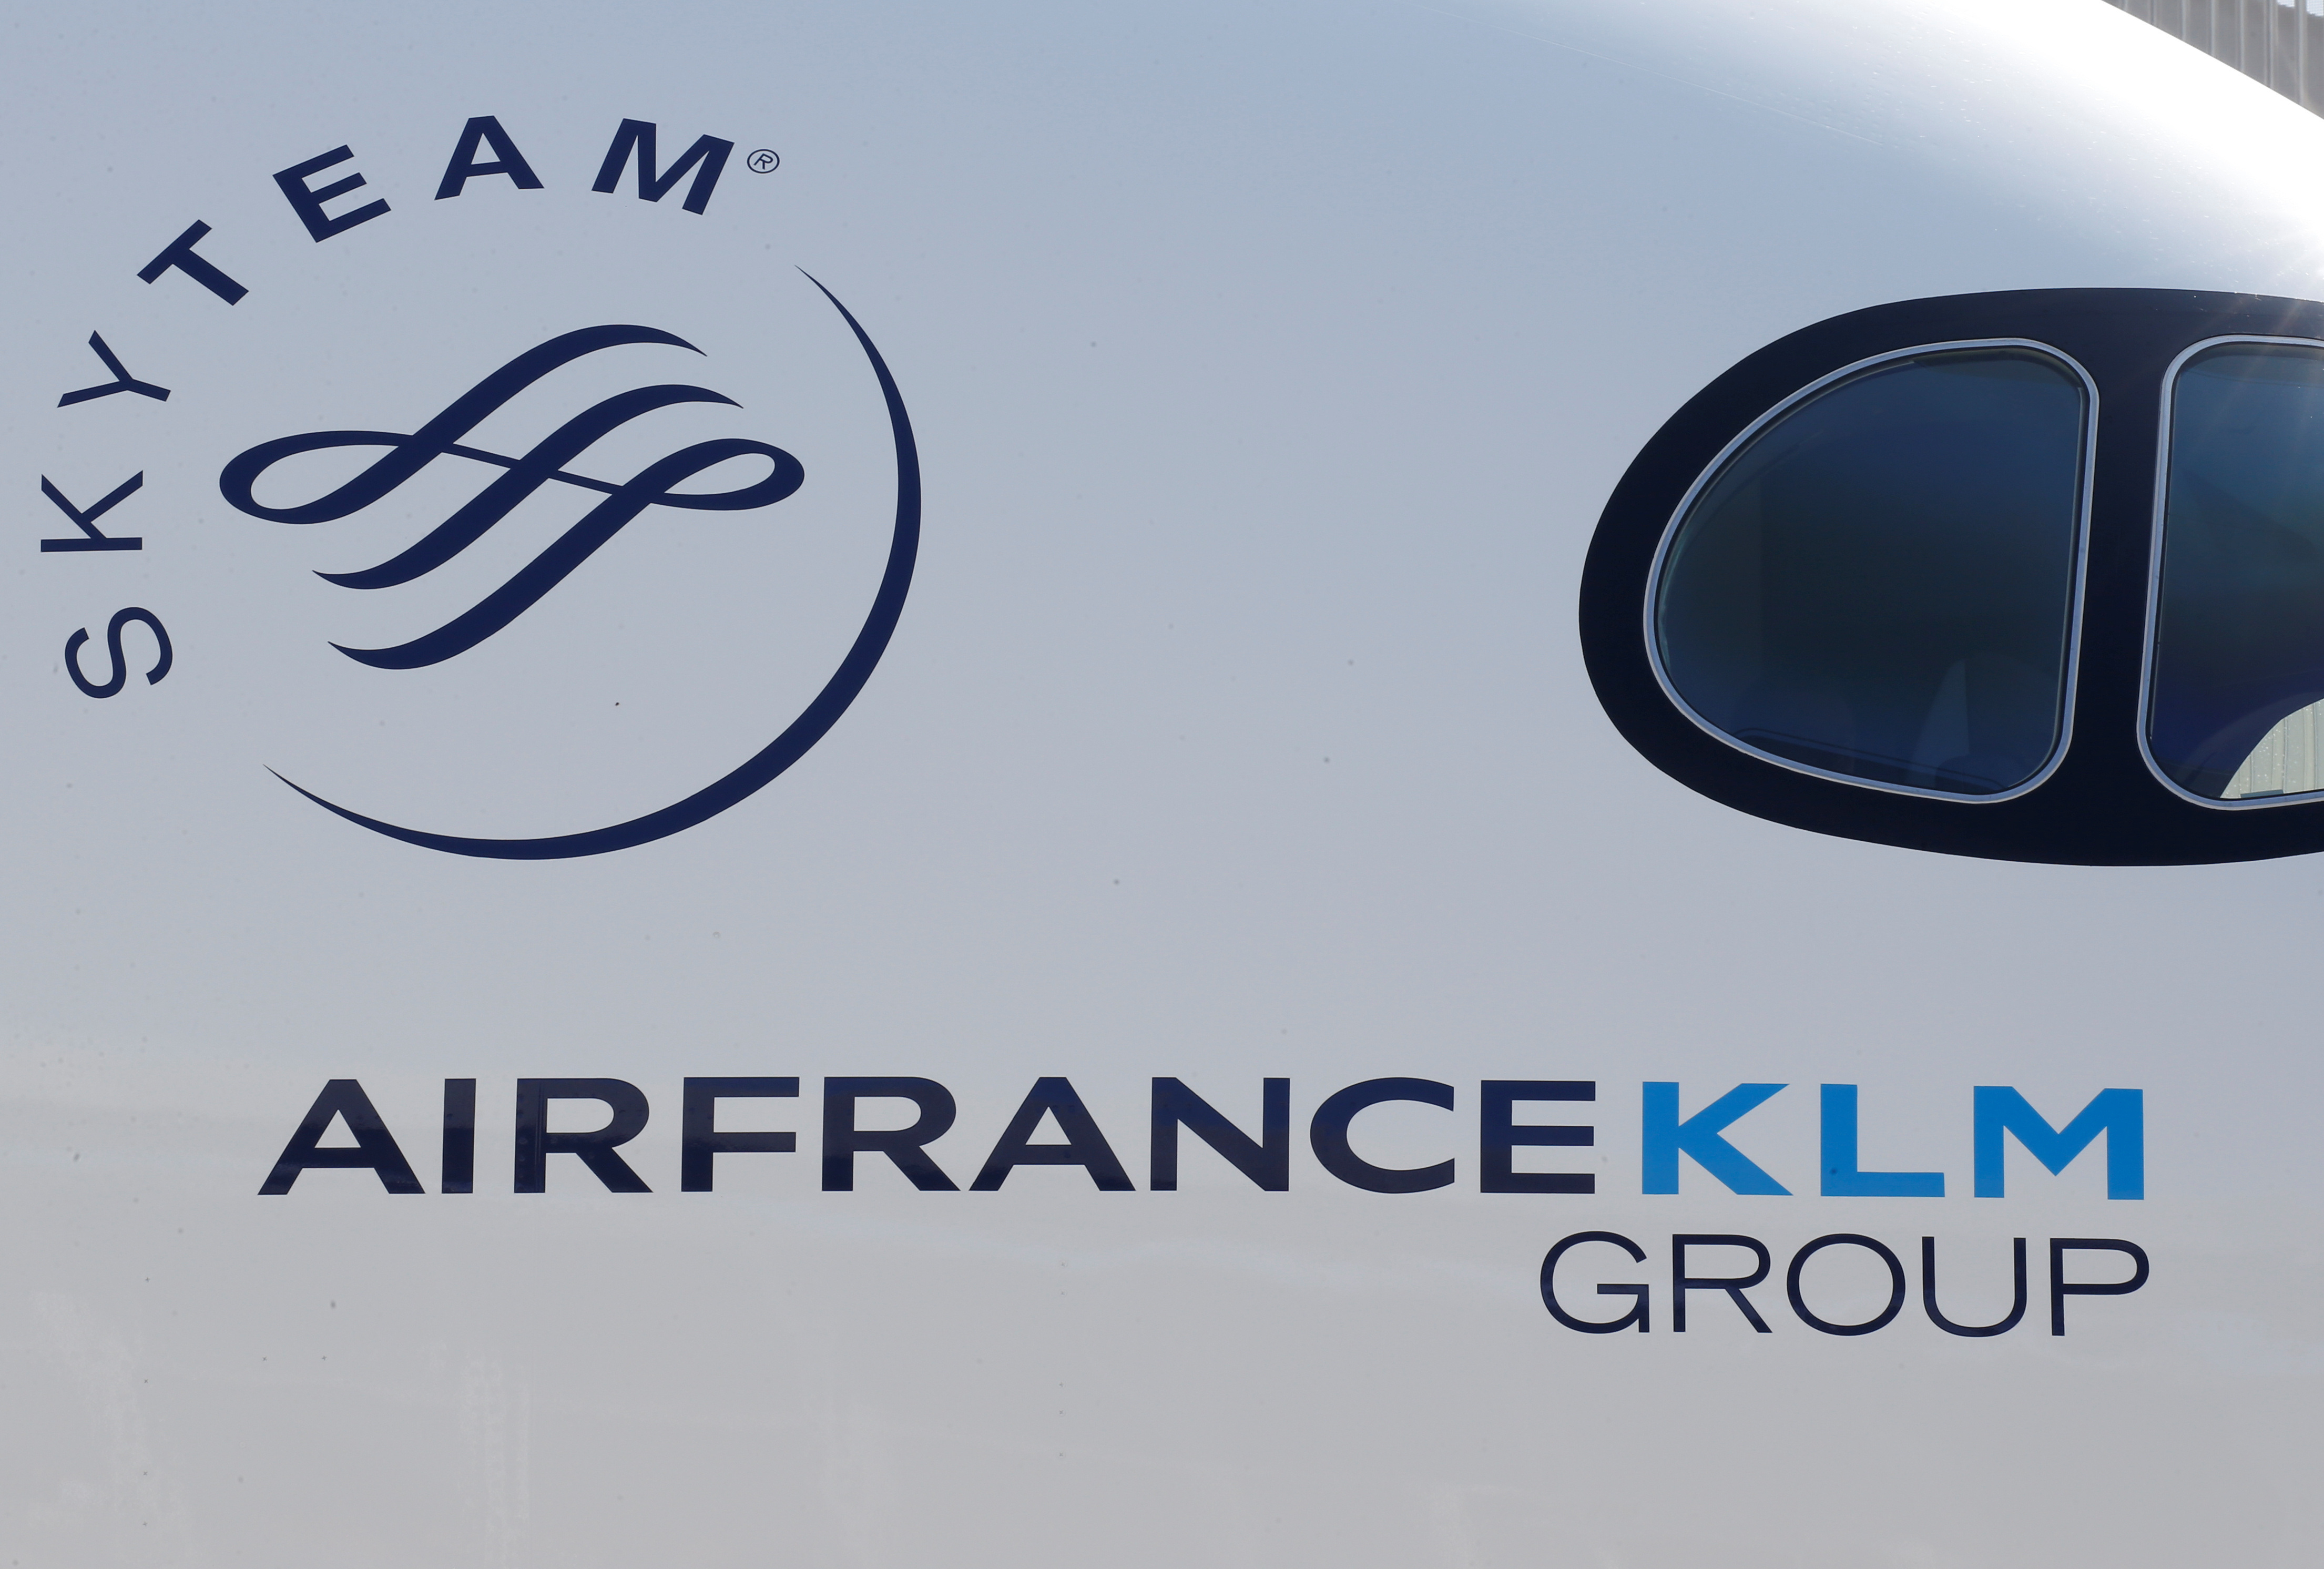 Logo of Air France KLM Group is pictured on the first Air France airliner's Airbus A350 during a ceremony at the aircraft builder's headquarters of Airbus in Colomiers